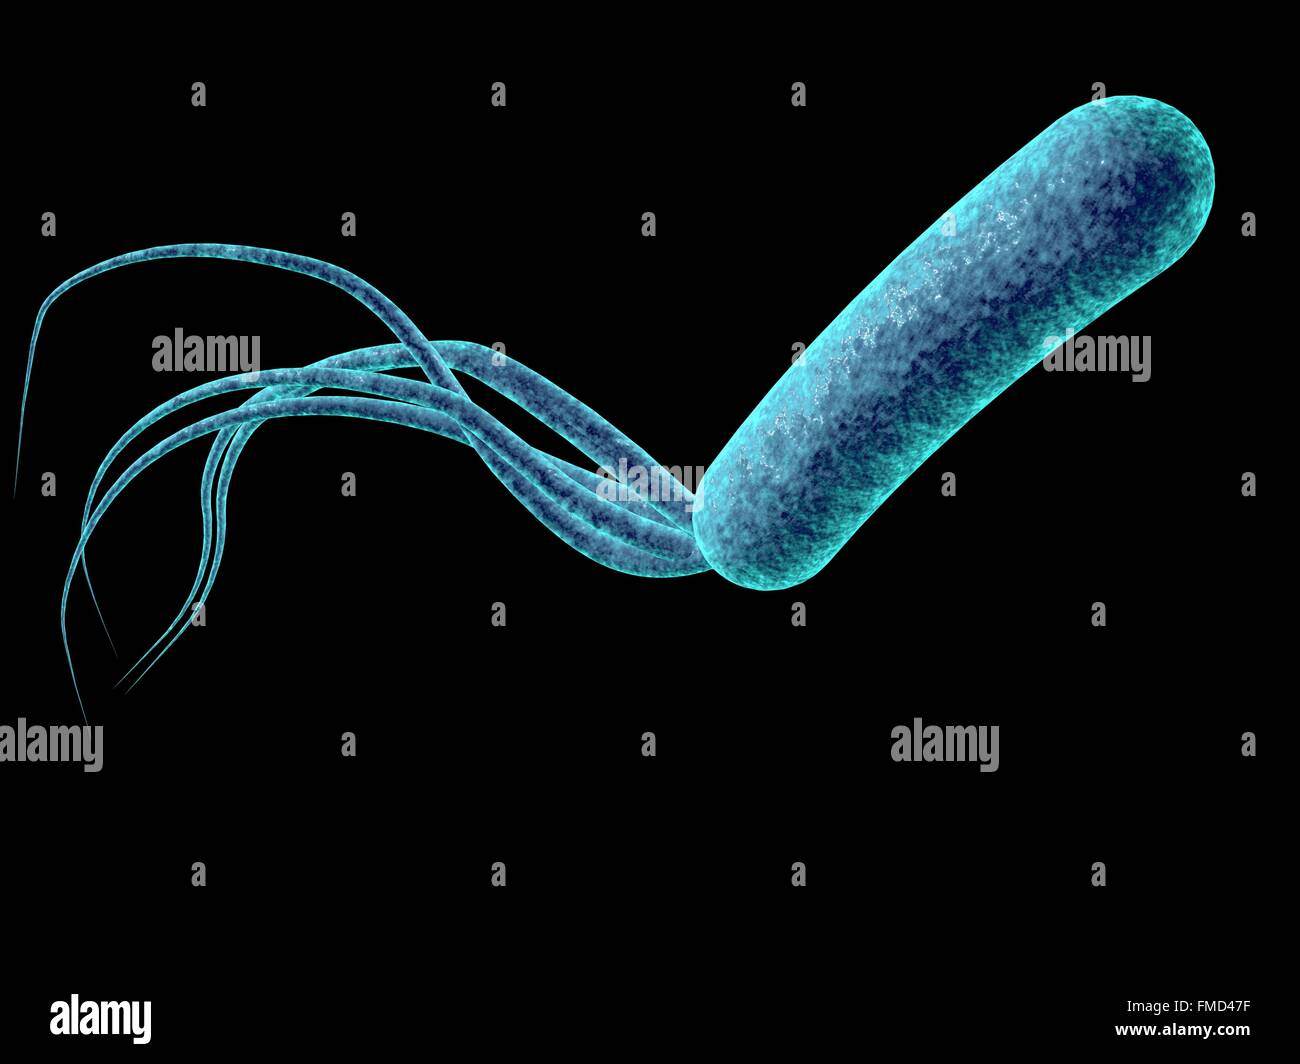 Pseudomonas aeruginosa bacteria, computer illustration. P. aeruginosa is a gram-negative bacterium which causes multiple antibiotic resistant nosocomial (hospital-acquired) infections of different location, including pneumonia, osteomyelitis, peritonitis and wound infections. Stock Photo